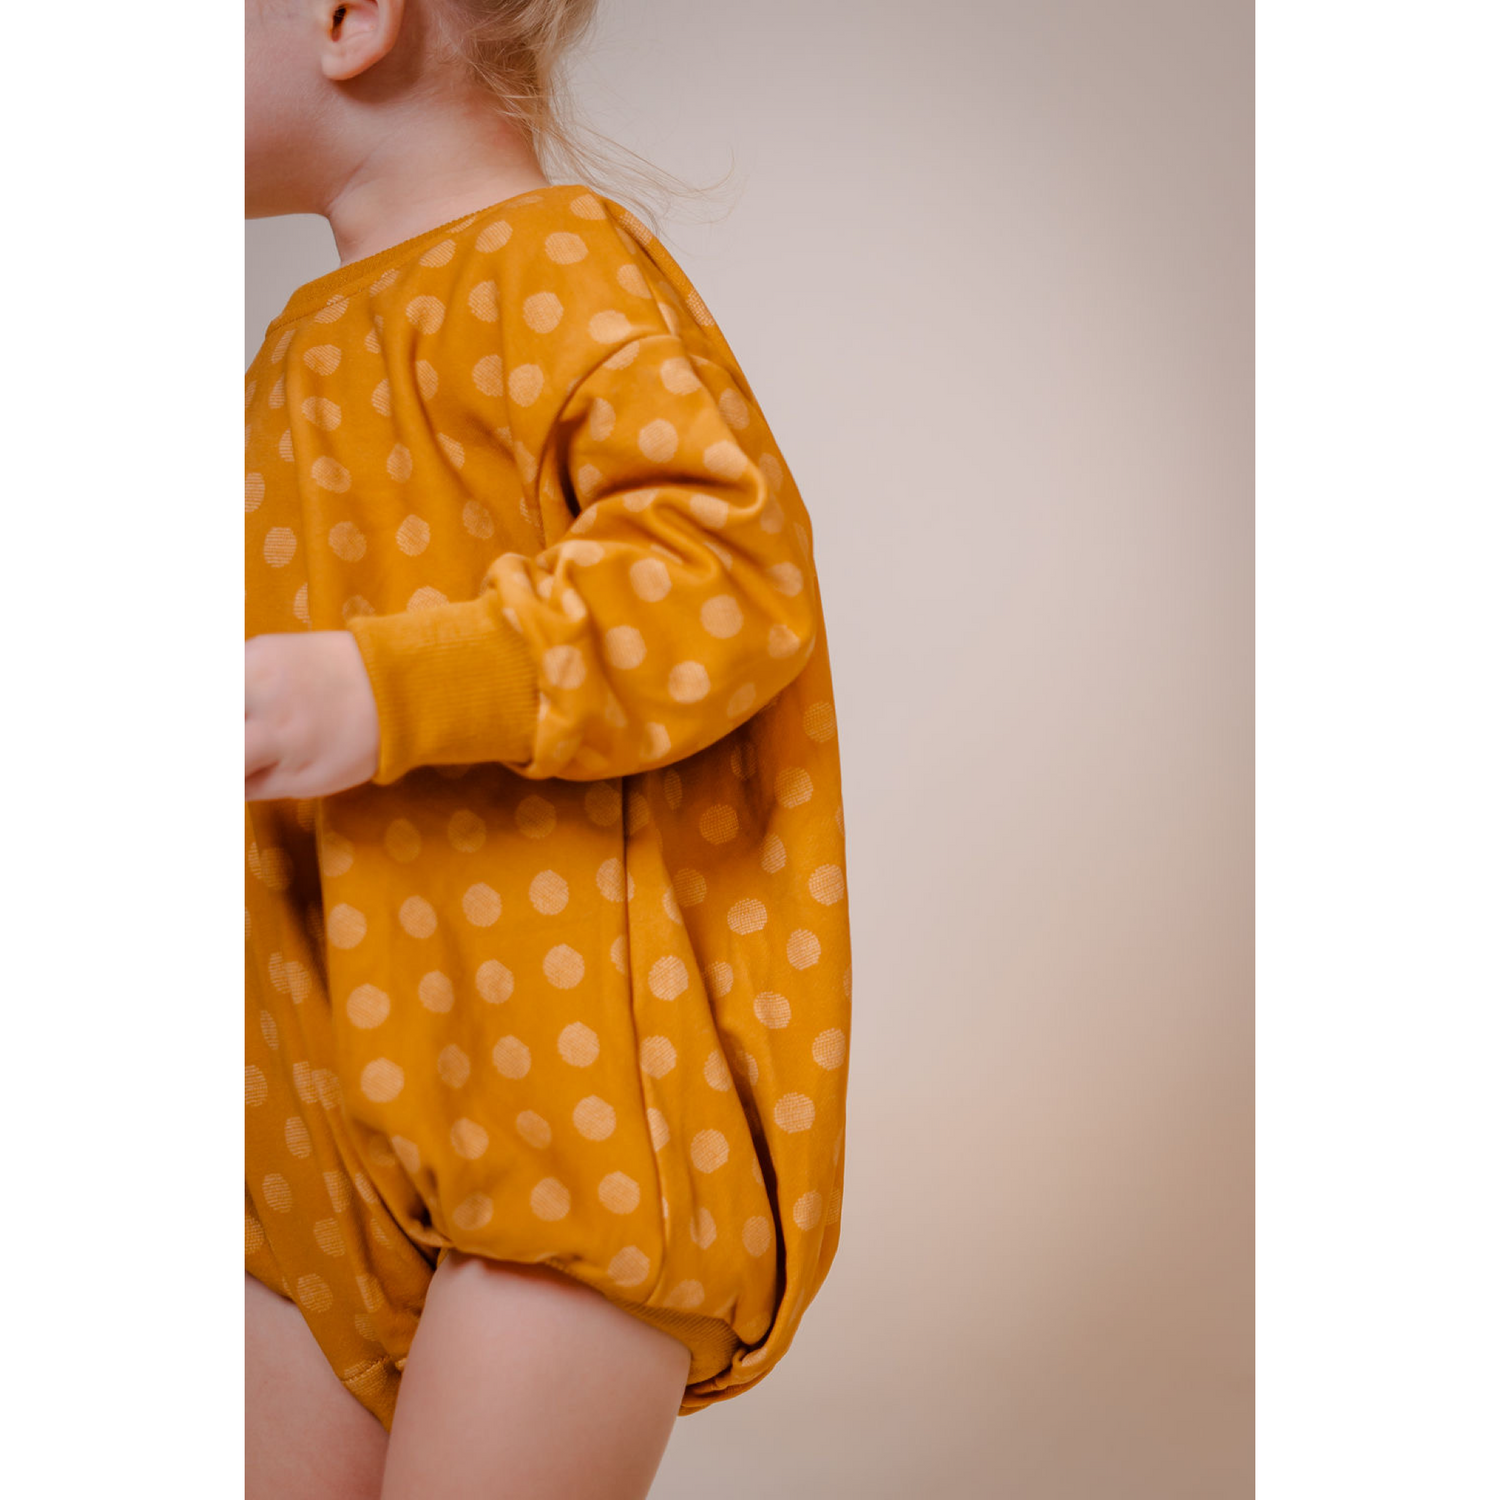 Toddler boy wearing a Soft, cotton sweater bubble in vibrant Mustard yellow abstract polka dot print